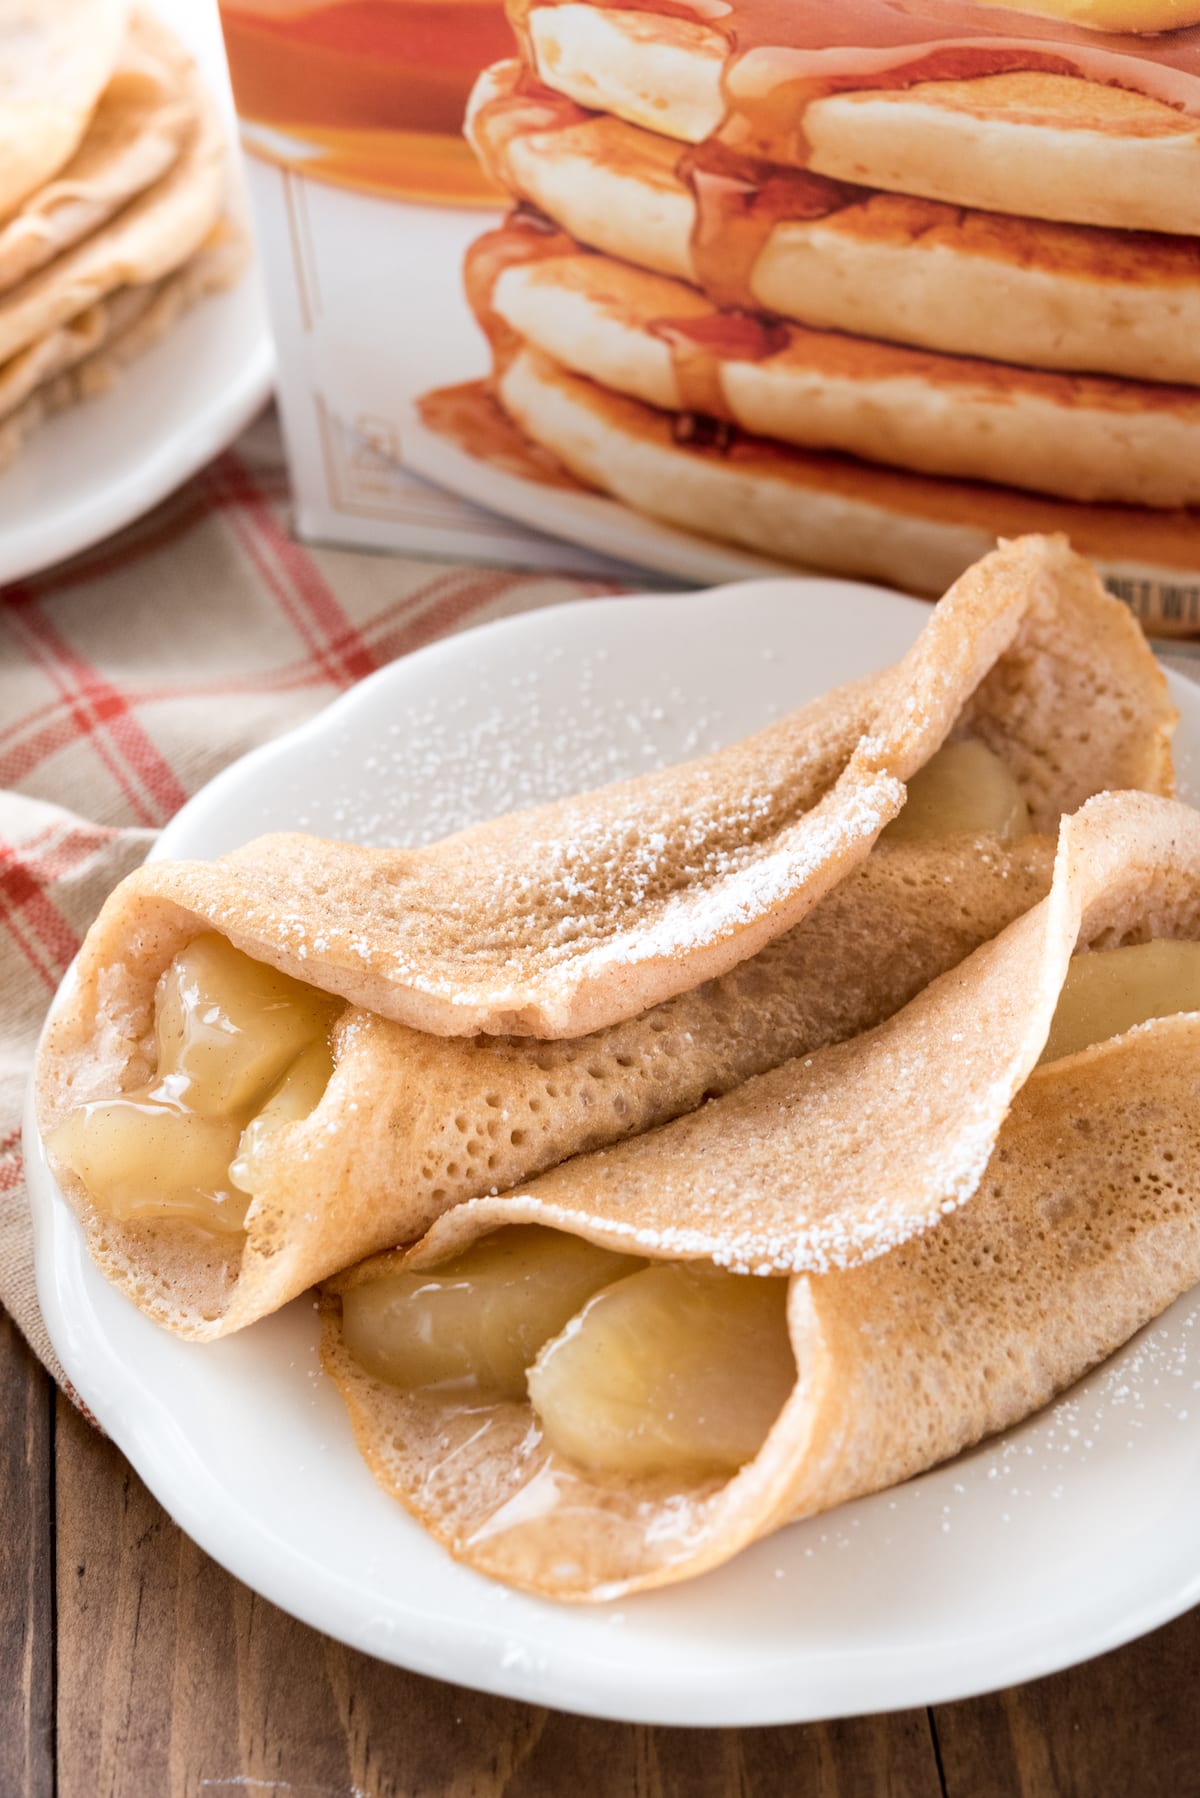 apples rolled up in pancakes on a white plate with powdered sugar on top.